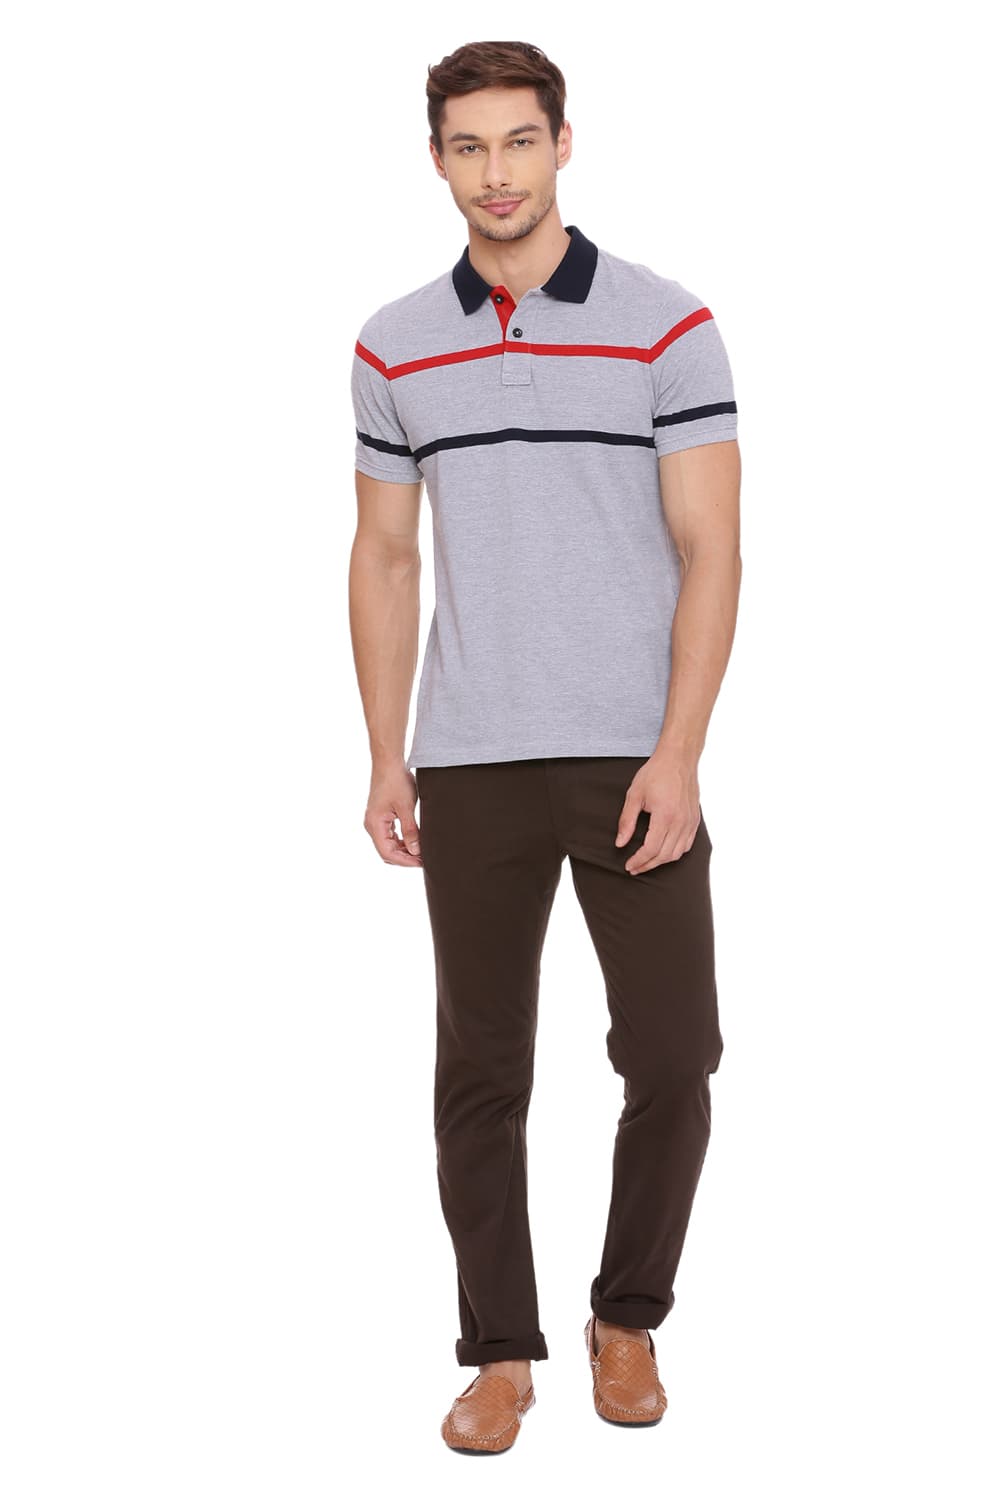 BASICS MUSCLE FIT STRIPED POLO T SHIRT